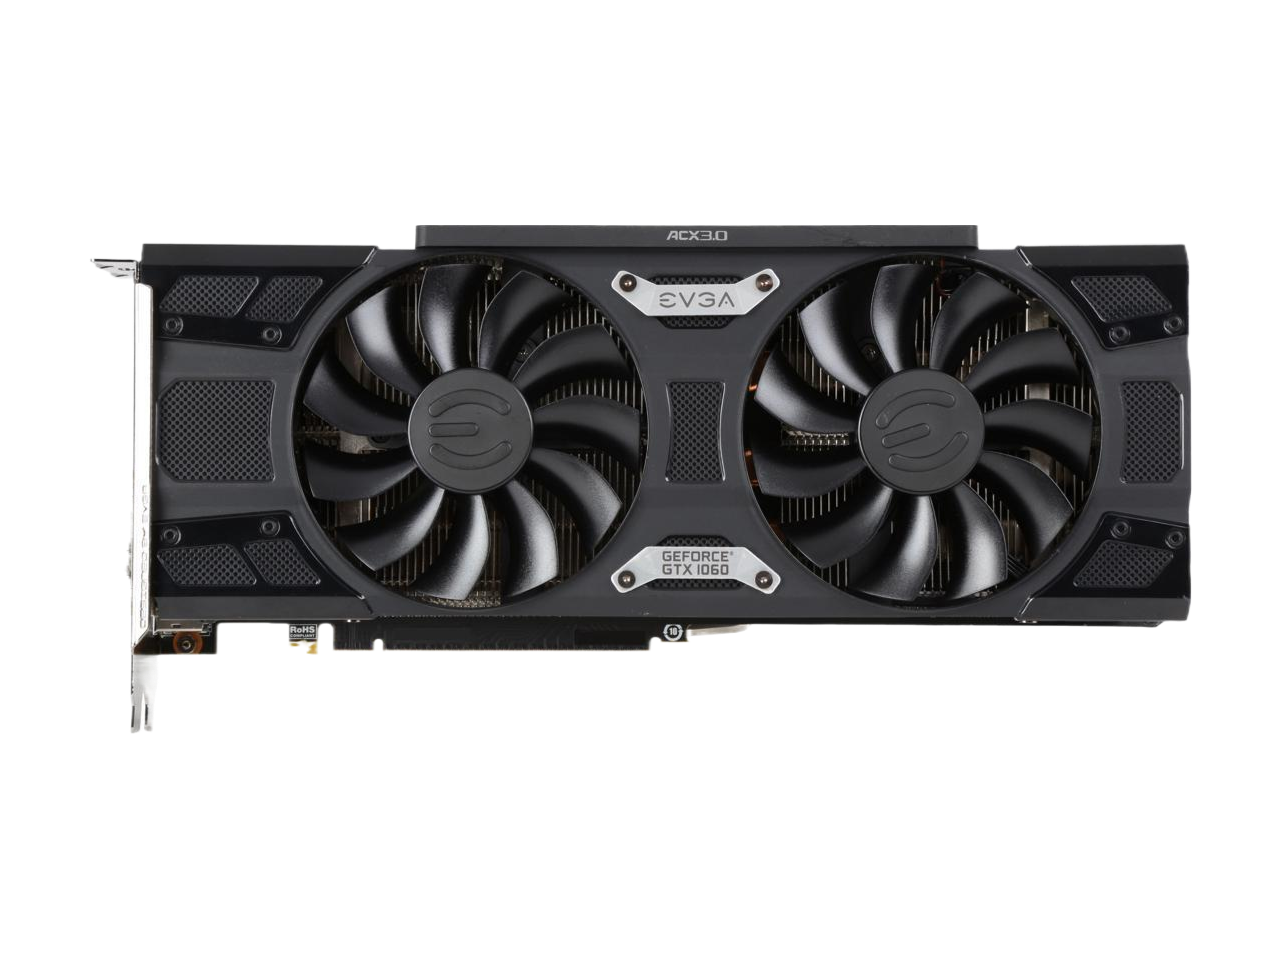 EVGA GeForce GTX 1060 FTW+ DT GAMING 6GB GDDR5 ACX 3.0 LED DX12 OSD Support (PXOC) Video Graphics Card 06G-P4-6366-KR